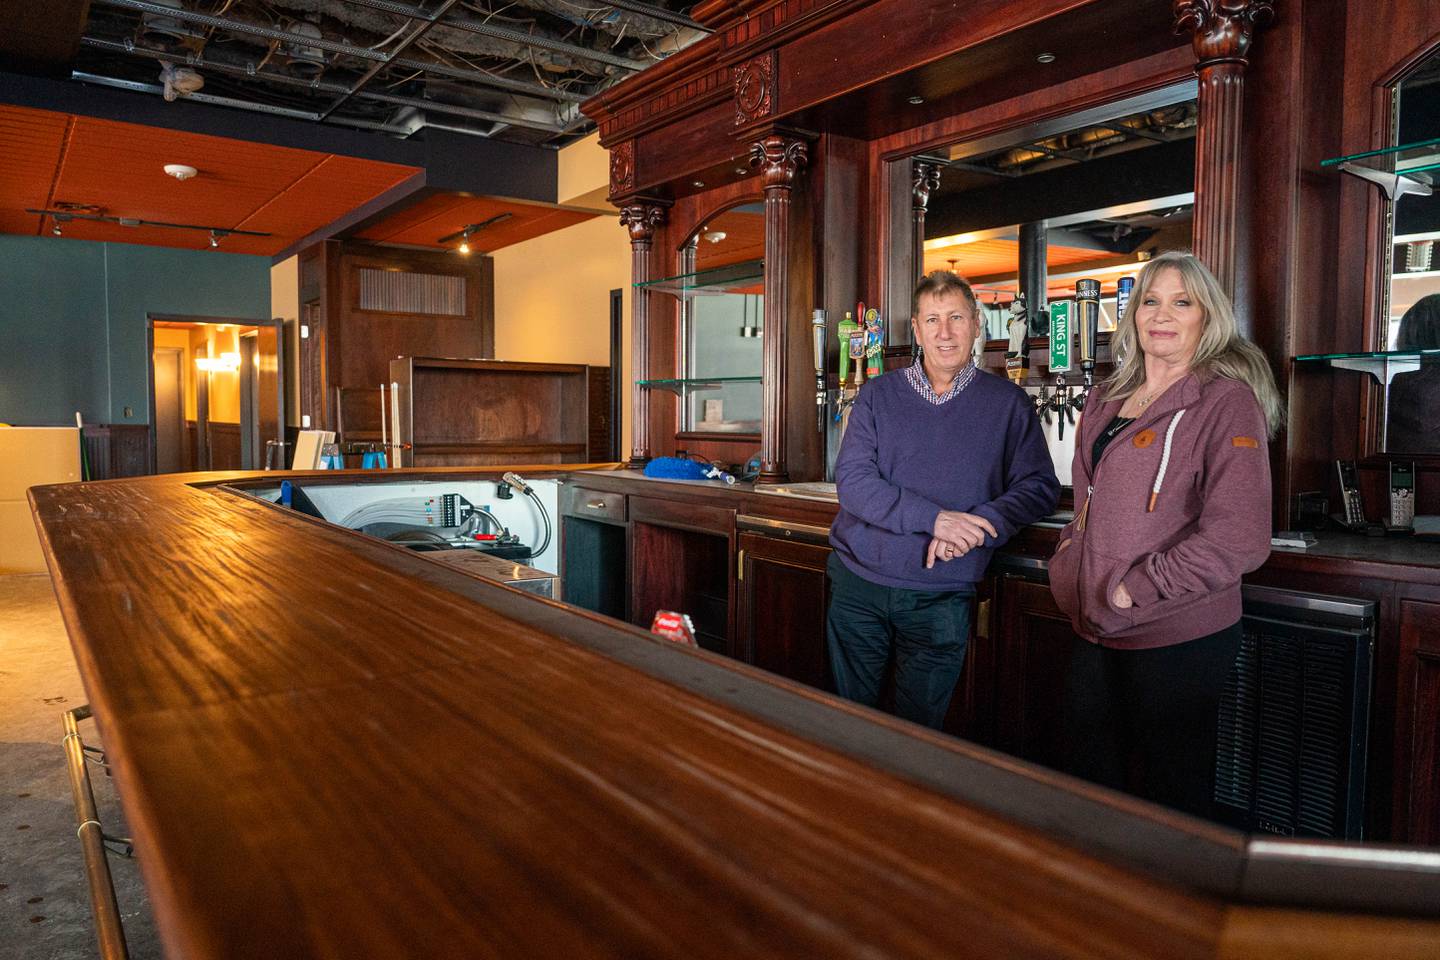 Anchorage has a seafood boil restaurant, a pet grooming store and an Irish pub on St.  Patrick’s Day, whereas a brand new restaurant opens in Girdwood